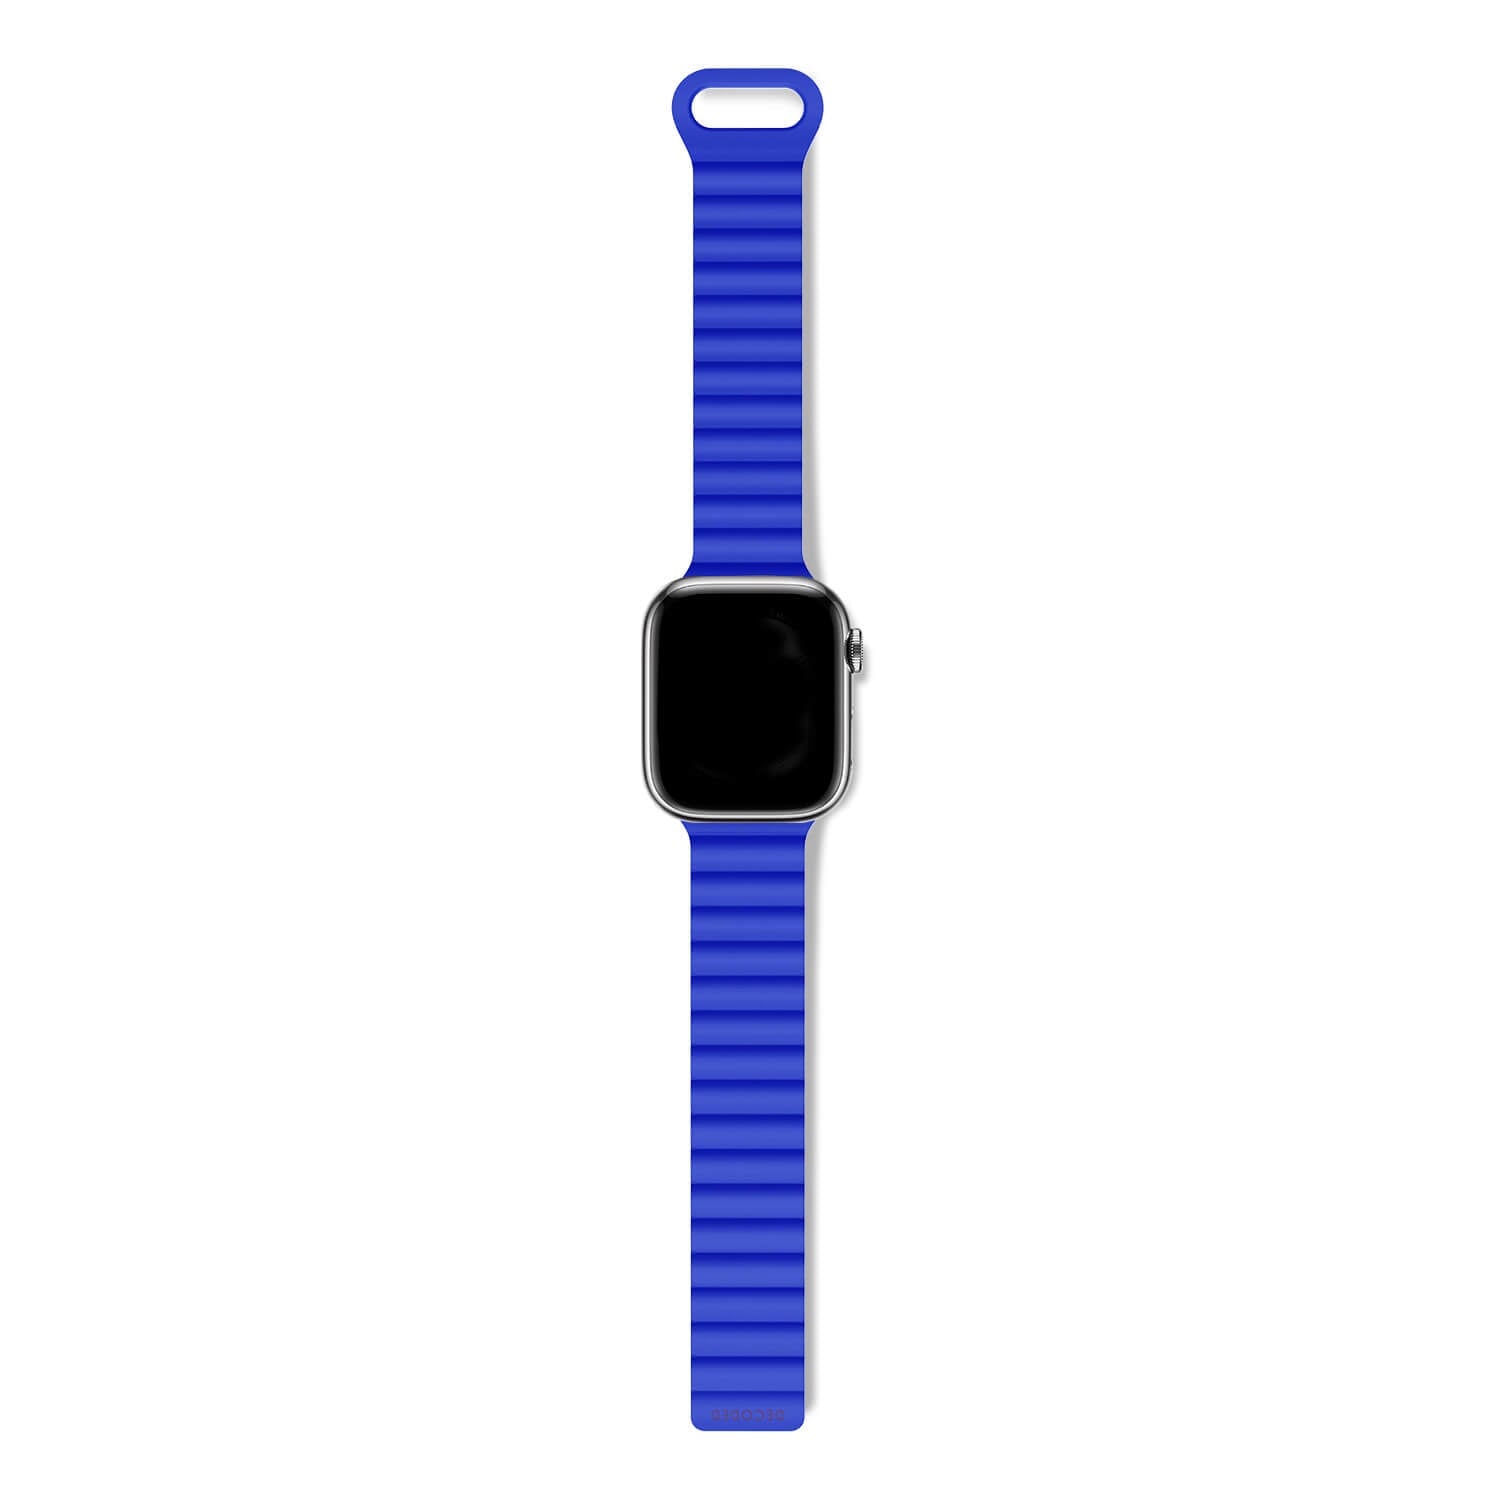 Silicone Traction Loop Strap Apple Watch 38mm, Galactic Blue